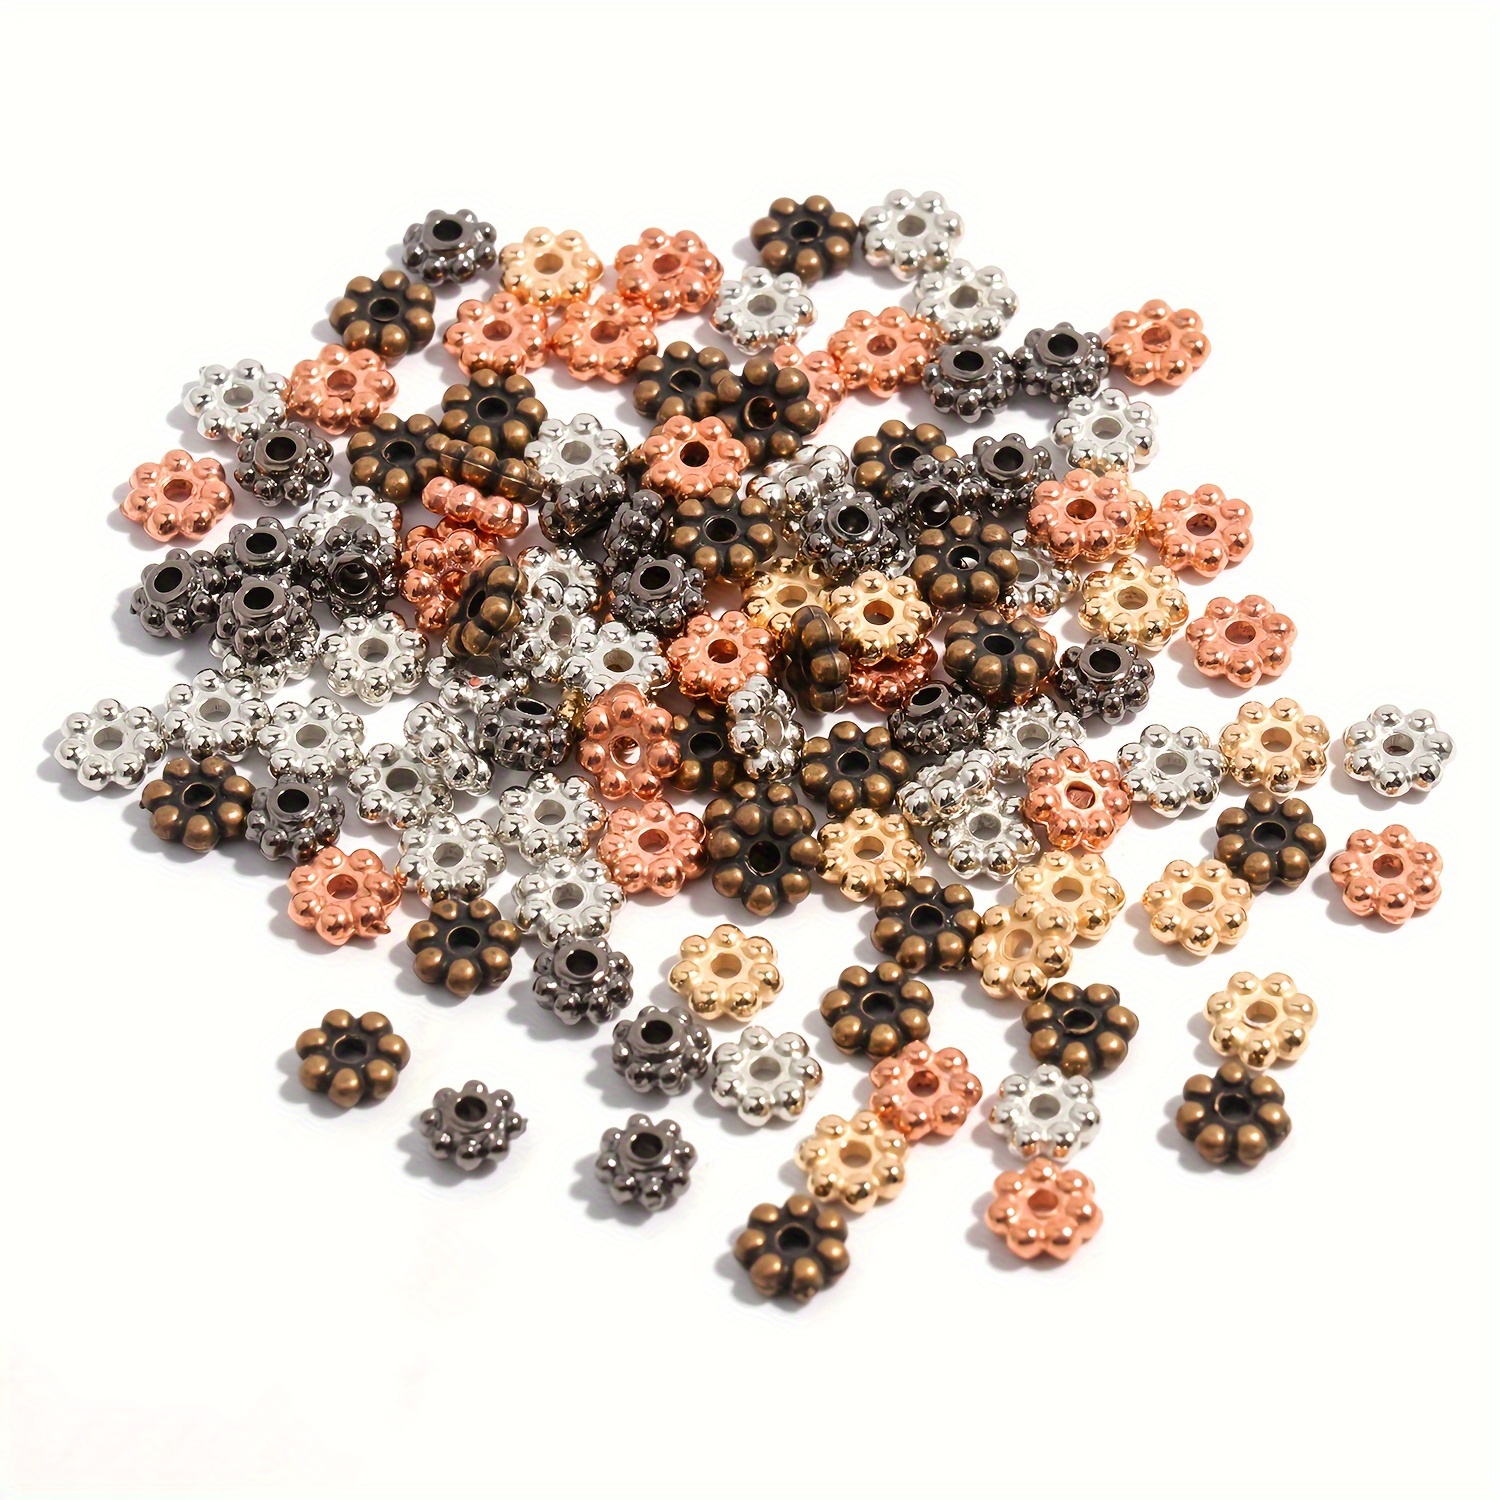 

200/100pcs 4/6mm Golden Silvery Ccb Flower Shaped Gasket Flat Round Spacer Beads For Jewelry Making Diy Handmade Special Bracelets Necklaces Earrings Beaded Decors Accessories